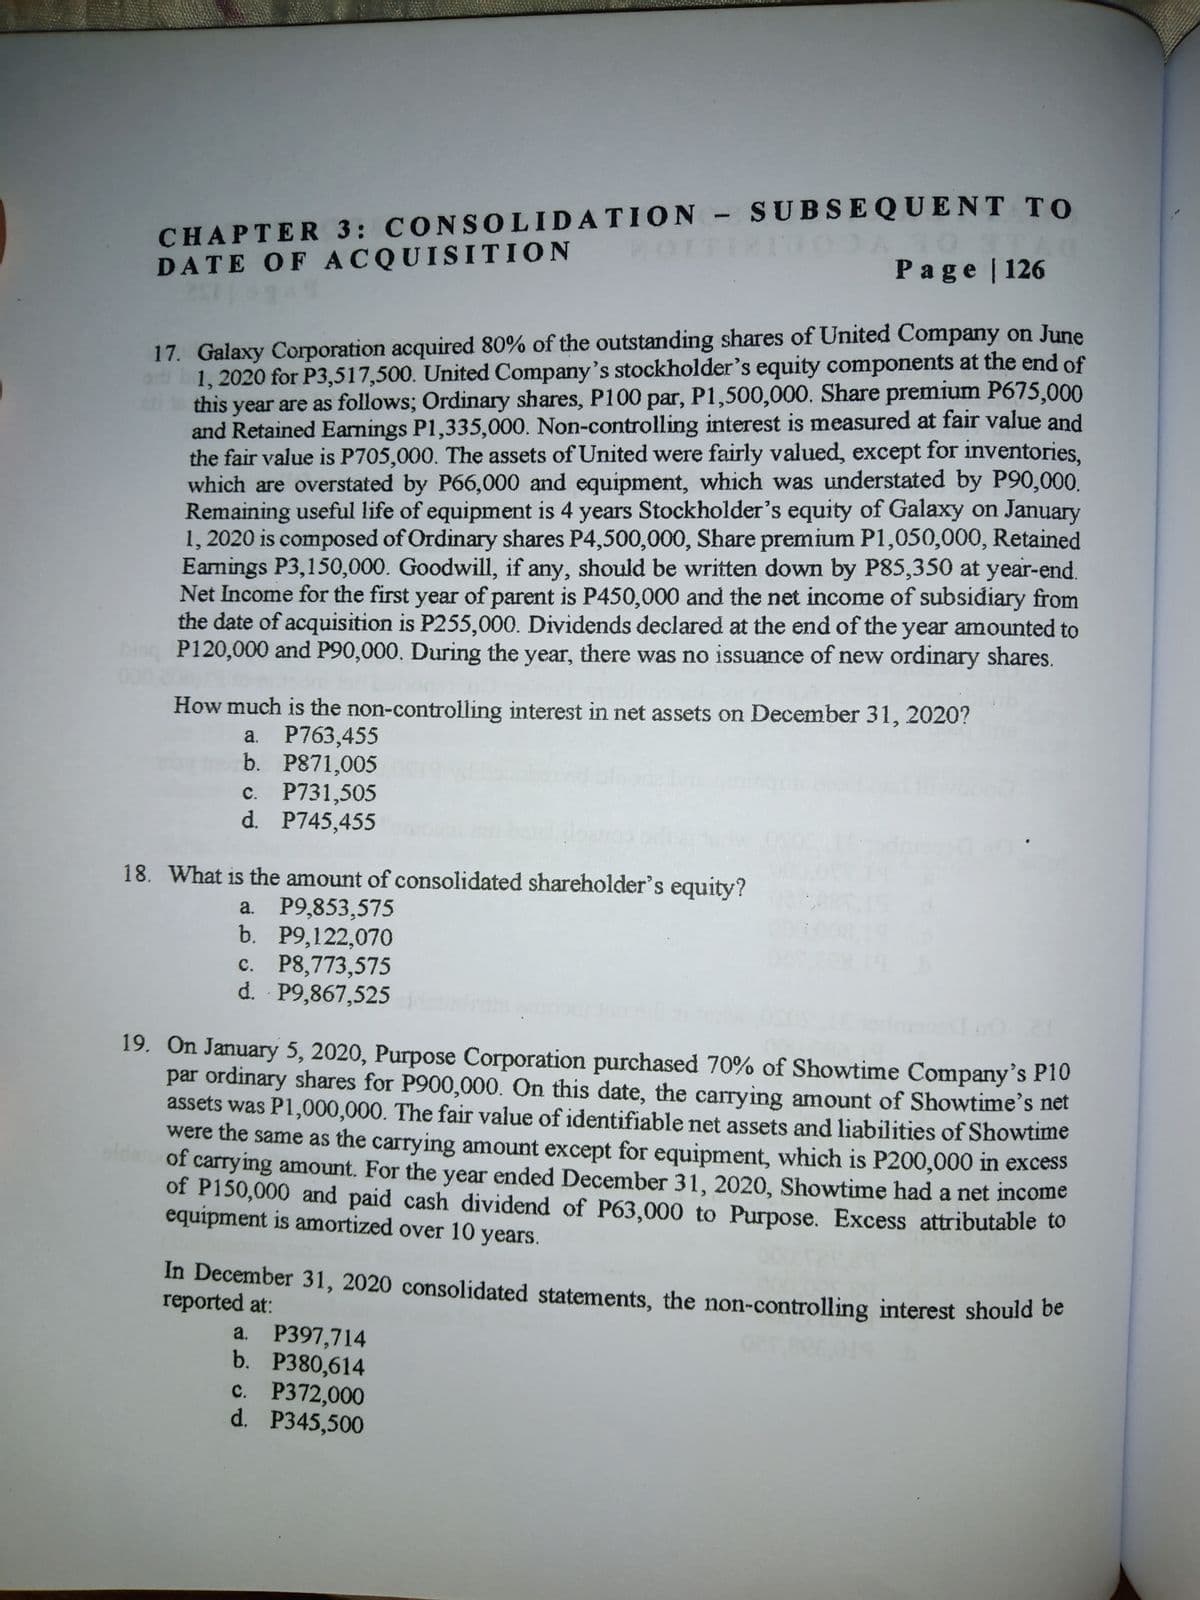 CHAPTER 3: CONSO0LIDATION- SUBS EQUENT TO
DATE OF ACQUISITION
Page | 126
17. Galaxy Corporation acquired 80% of the outstanding shares of United Company on June
1, 2020 for P3,517,500. United Company's stockholder's equity components at the end of
this year are as follows; Ordinary shares, P100 par, P1,500,000. Share premium P675,000
and Retained Eamings P1,335,000. Non-controlling interest is measured at fair value and
the fair value is P705,000. The assets of United were fairly valued, except for inventories,
which are overstated by P66,000 and equipment, which was understated by P90,000.
Remaining useful life of equipment is 4 years Stockholder's equity of Galaxy on January
1, 2020 is composed of Ordinary shares P4,500,000, Share premium P1,050,000, Retained
Earnings P3,150,000. Goodwill, if any, should be written down by P85,350 at year-end.
Net Income for the first year of parent is P450,000 and the net income of subsidiary from
the date of acquisition is P255,000. Dividends declared at the end of the year amounted to
P120,000 and P90,000. During the year, there was no issuance of new ordinary shares.
How much is the non-controlling interest in net assets on December 31, 2020?
a. P763,455
b. P871,005
c. P731,505
d. P745,455
18. What is the amount of consolidated shareholder's equity?
a. P9,853,575
b. P9,122,070
c. P8,773,575
d. P9,867,525
19. On January 5, 2020, Purpose Corporation purchased 70% of Showtime Company's P10
par ordinary shares for P900,000. On this date, the carrying amount of Showtime's net
assets was P1,000,000. The fair value of identifiable net assets and liabilities of Showtime
were the same as the carrying amount except for equipment, which is P200,000 in excess
alda
of carrying amount. For the year ended December 31, 2020, Showtime had a net income
of P150,000 and paid cash dividend of P63,000 to Purpose. Excess attributable to
equipment is amortized over 10 years.
In December 31, 2020 consolidated statements, the non-controlling interest should be
reported at:
а. Р397,714
b. P380,614
c. P372,000
d. P345,500
